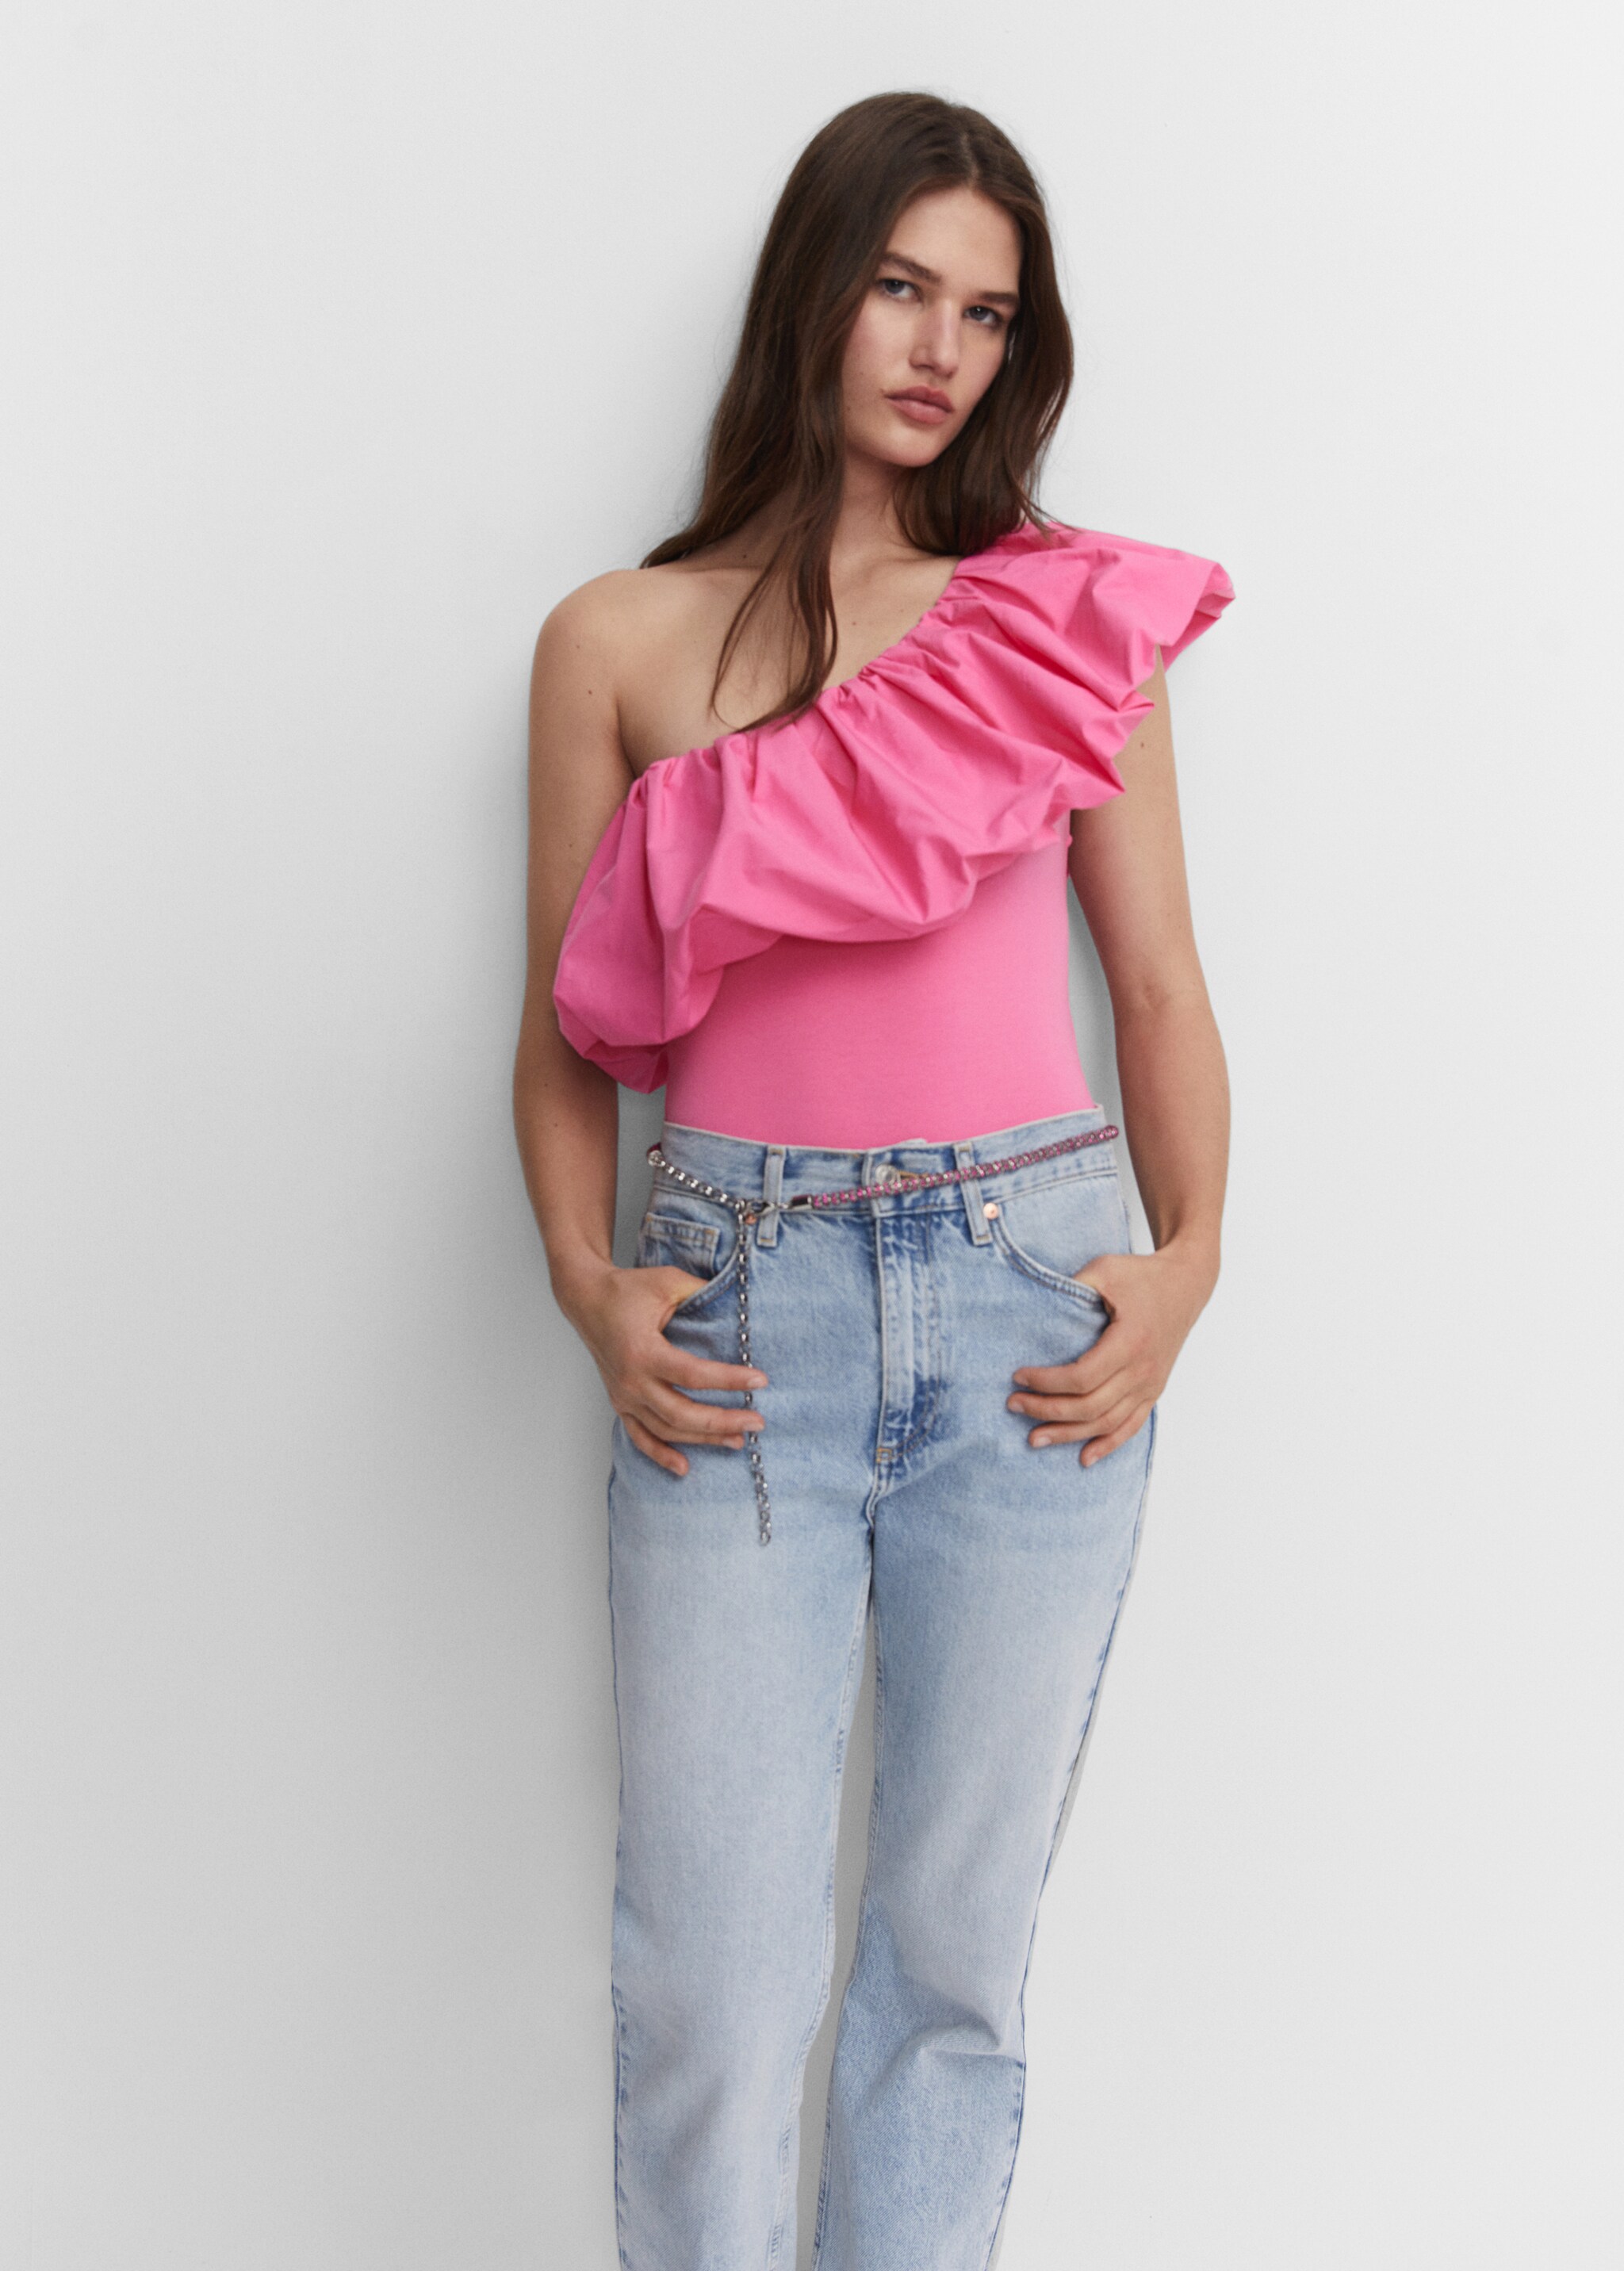 Ruffled cotton body - Details of the article 2